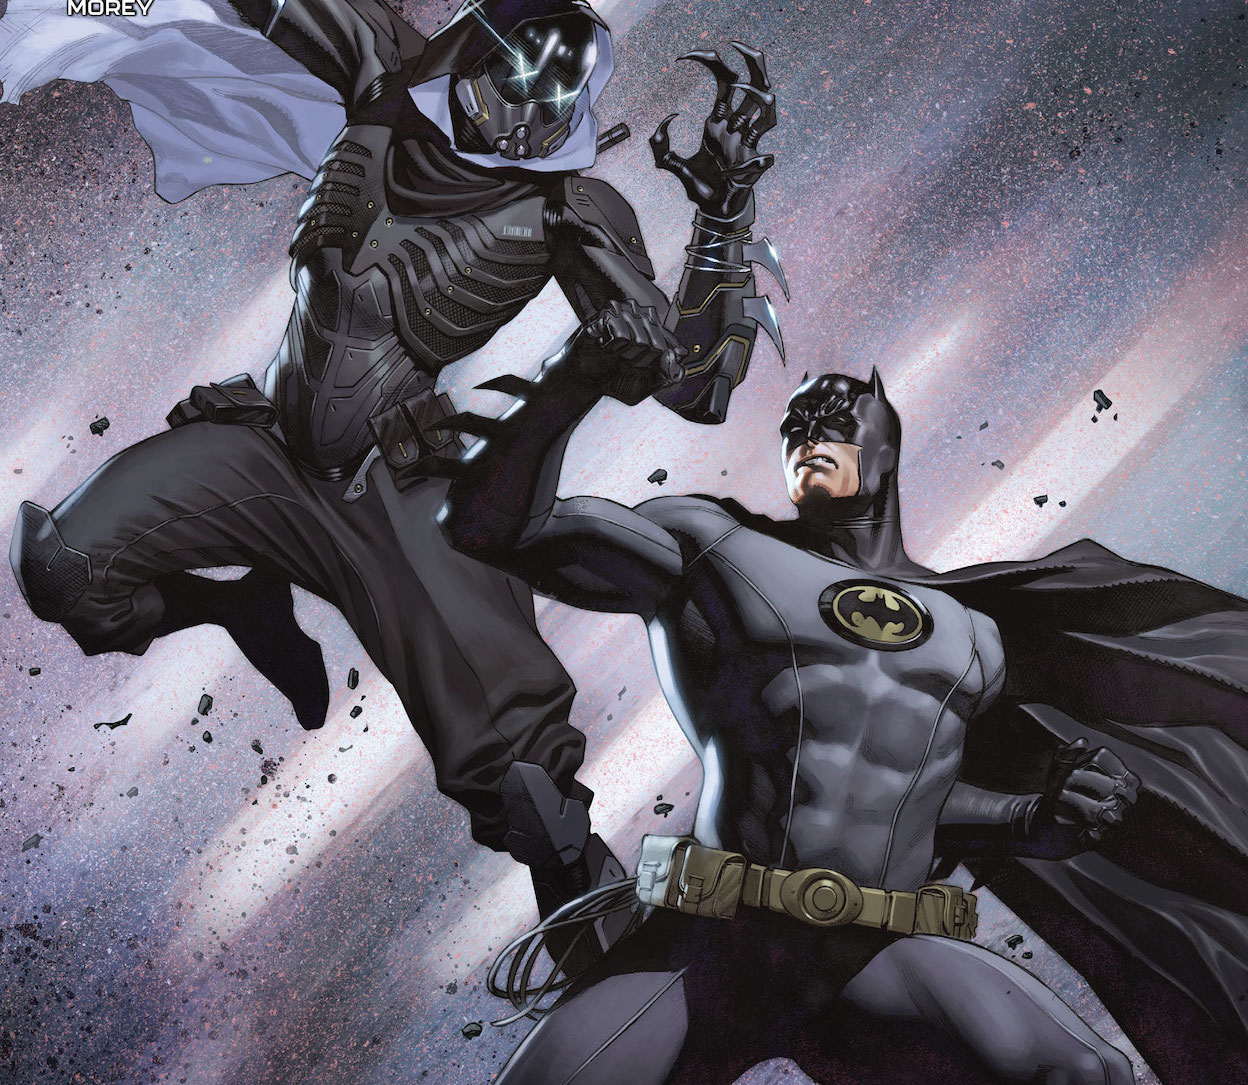 'Batman' #119 is a face-off with Lex Luthor and Abyss